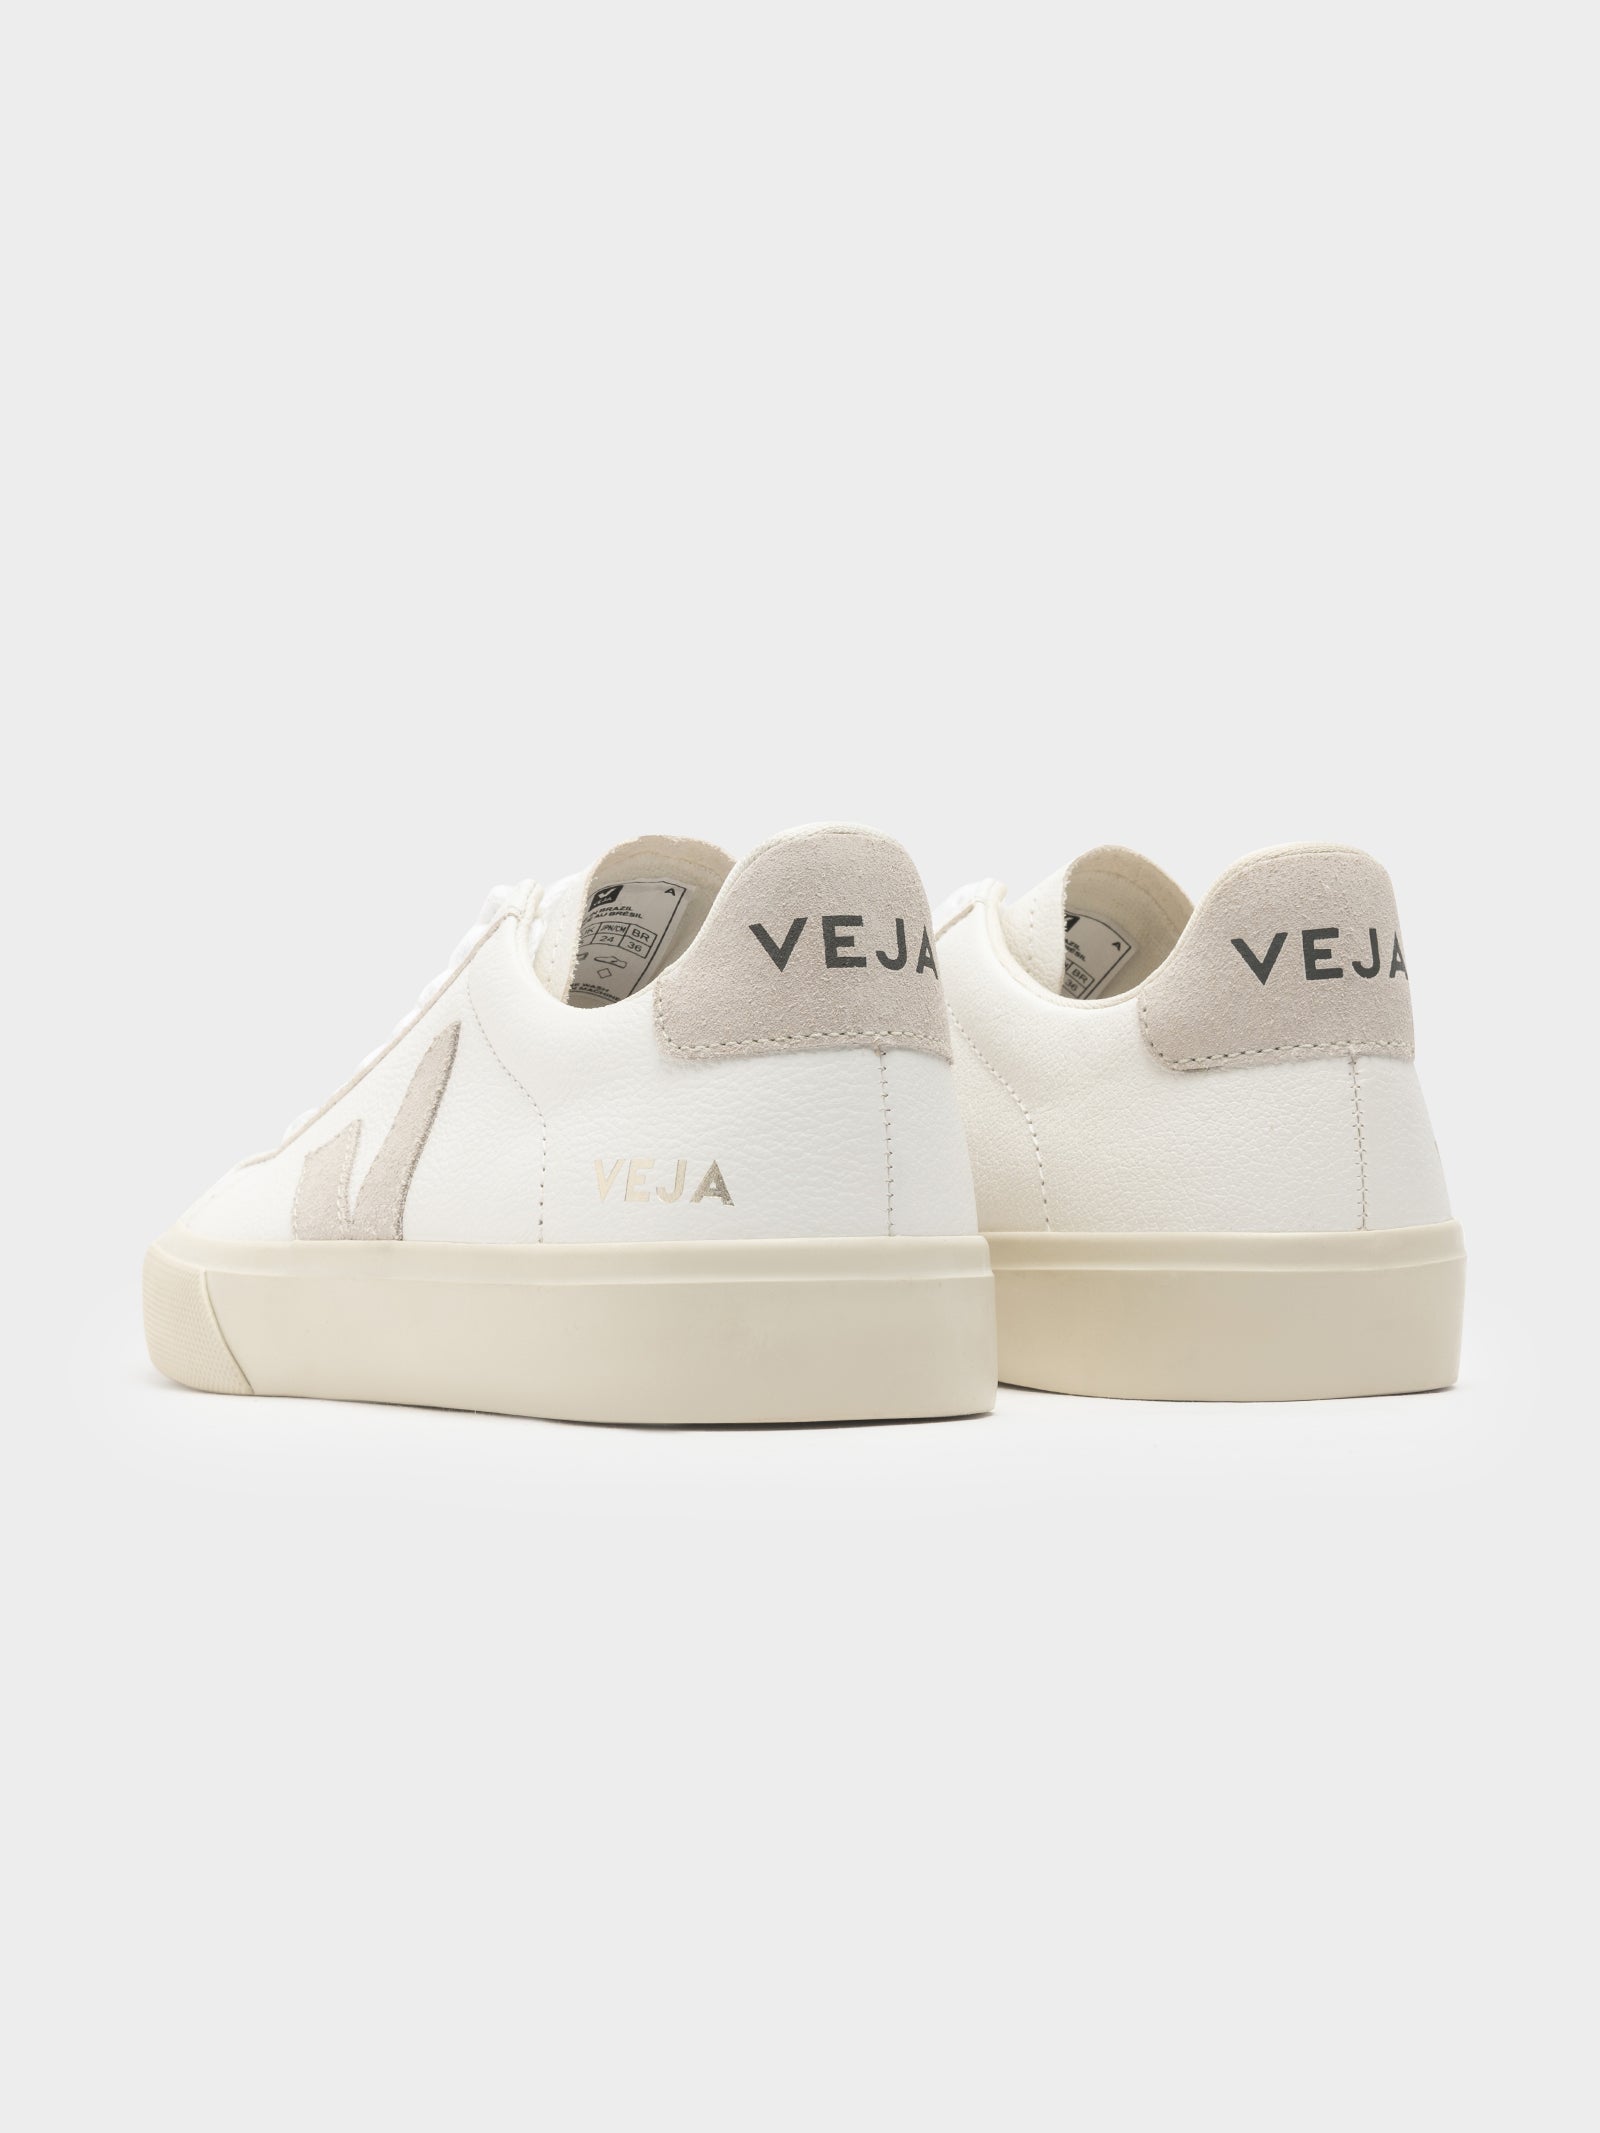 Womens Campo Leather Suede Sneakers in White & Natural Suede